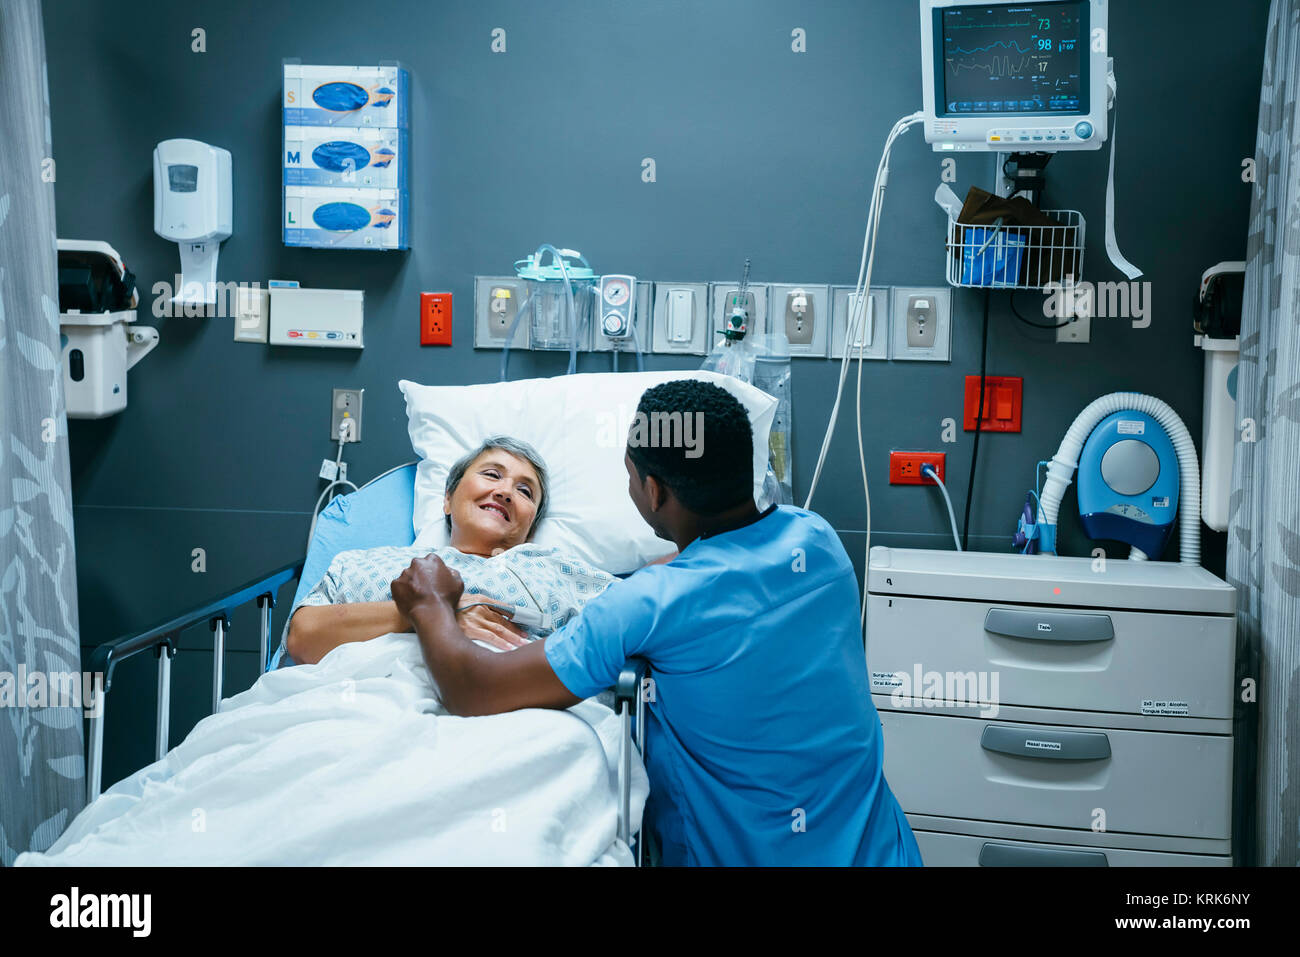 Nurse talking to patient in hospital bed Stock Photo